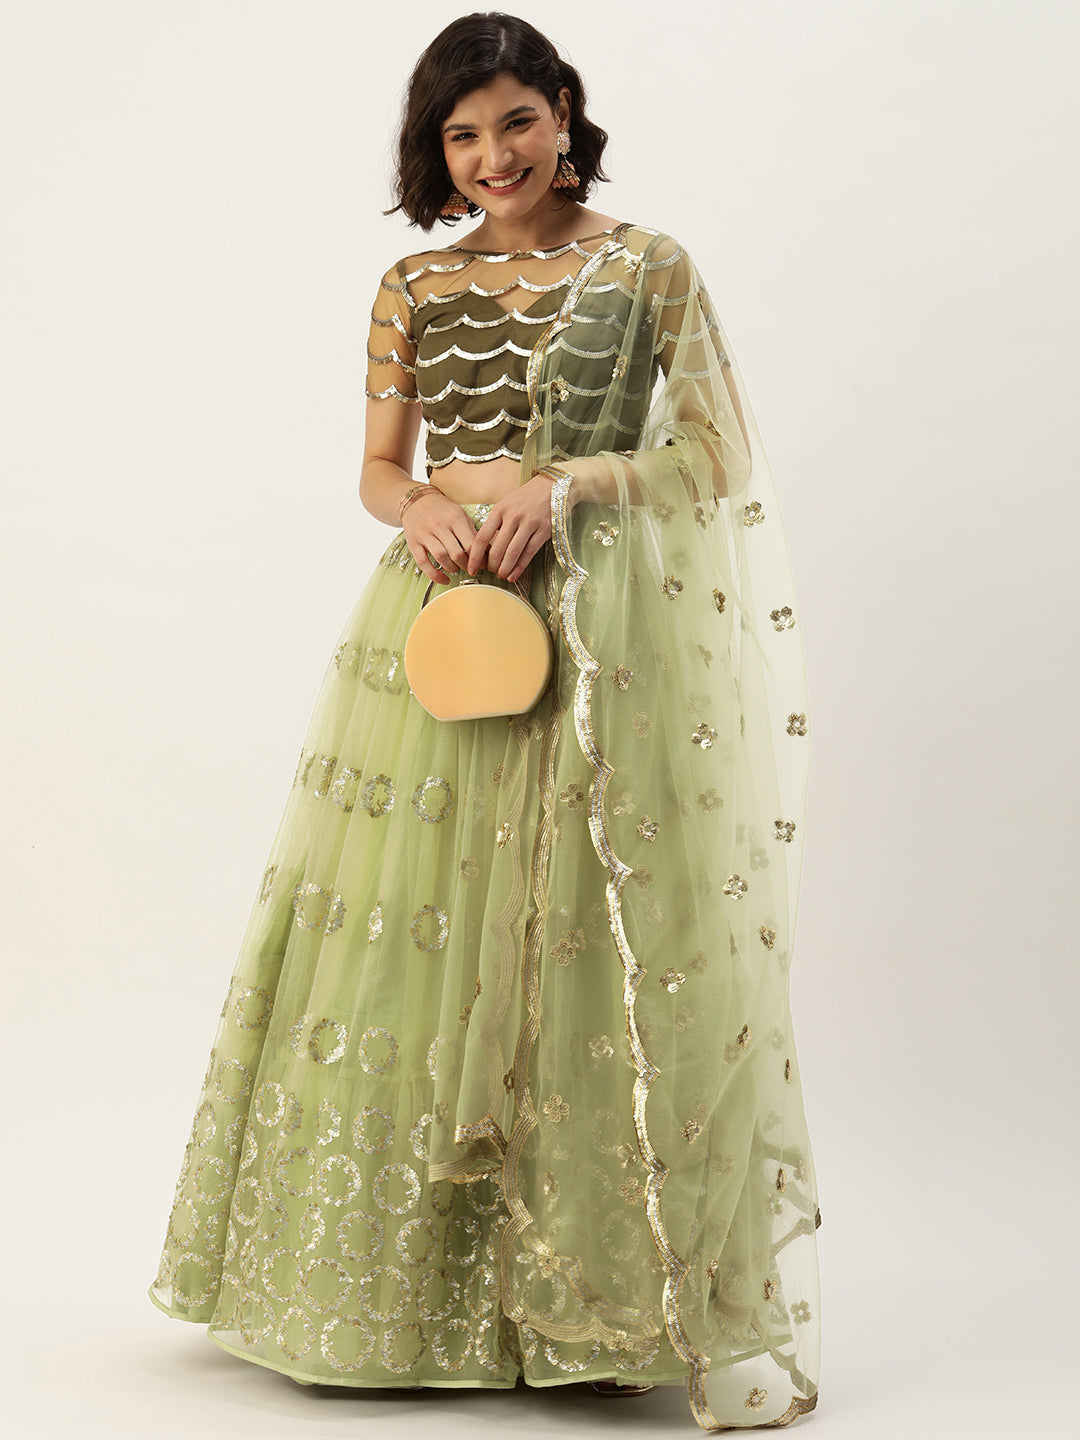 Women's Lime Green Net Embroideried Round Sequince Lehenga & Blouse With Dupatta - Royal Dwells